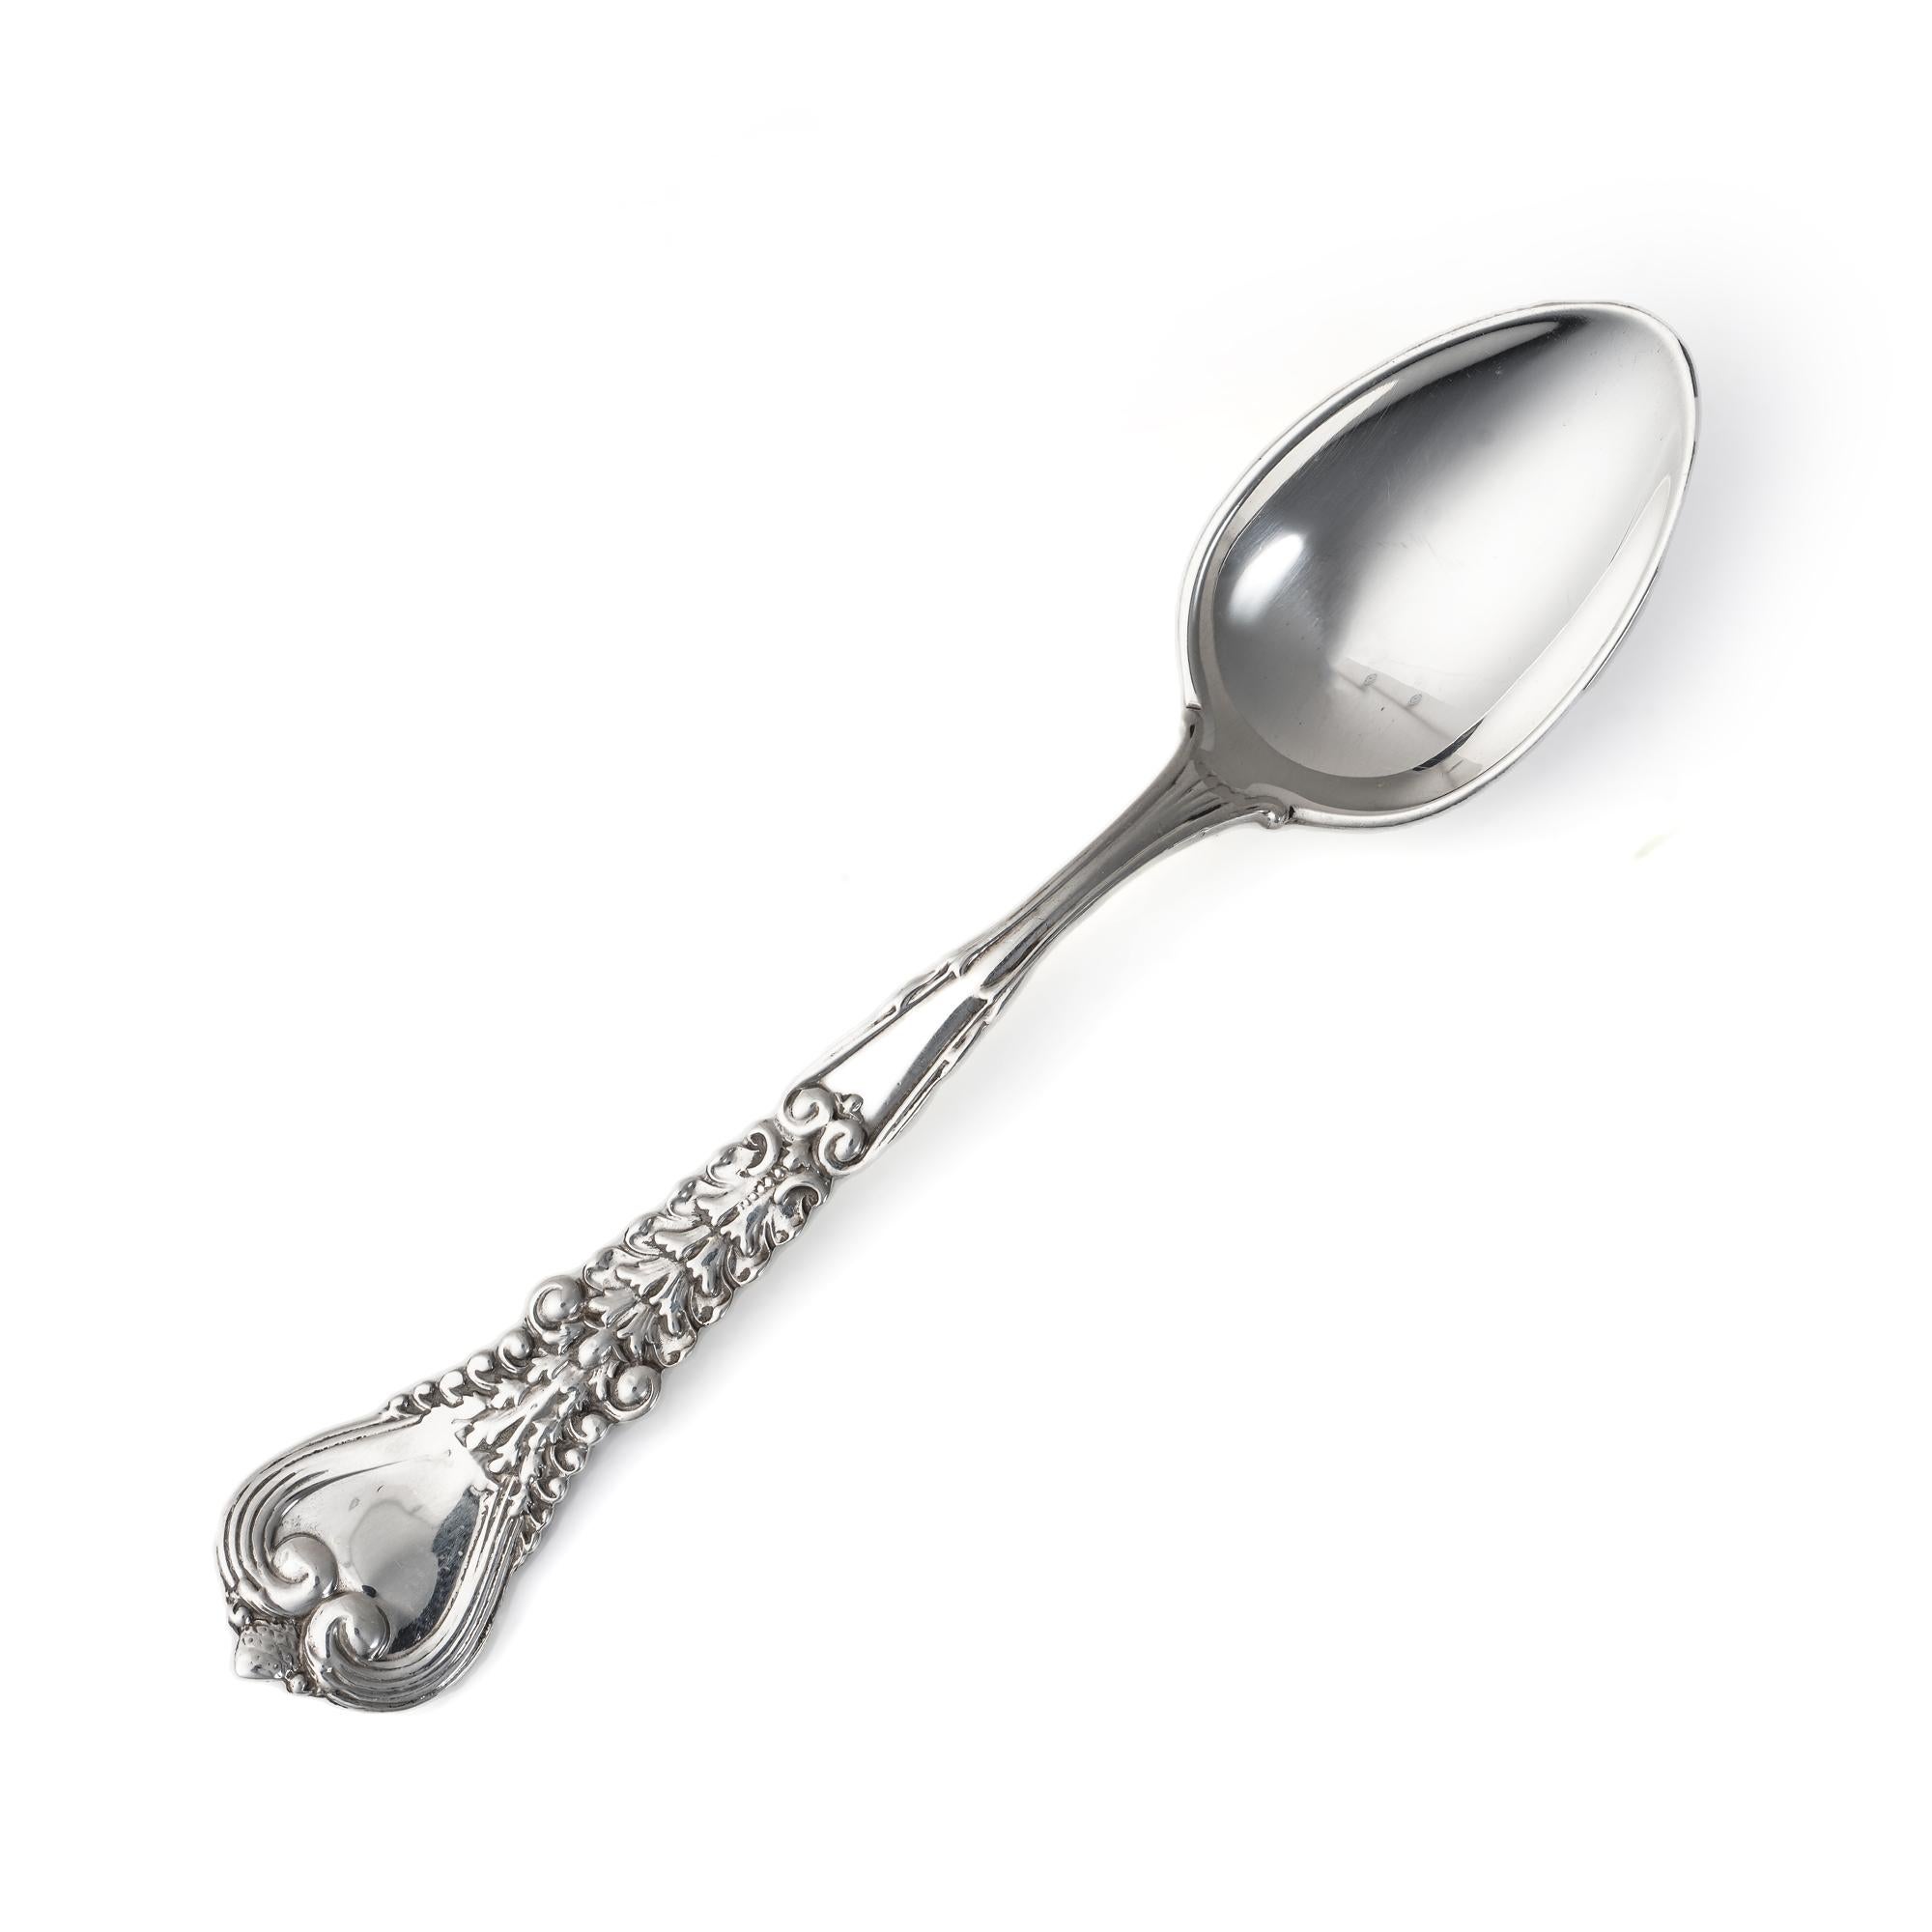 Antique Tiffany & Co. Sterling Silver Florentine Pattern Demitasse Spoon For Sale 2